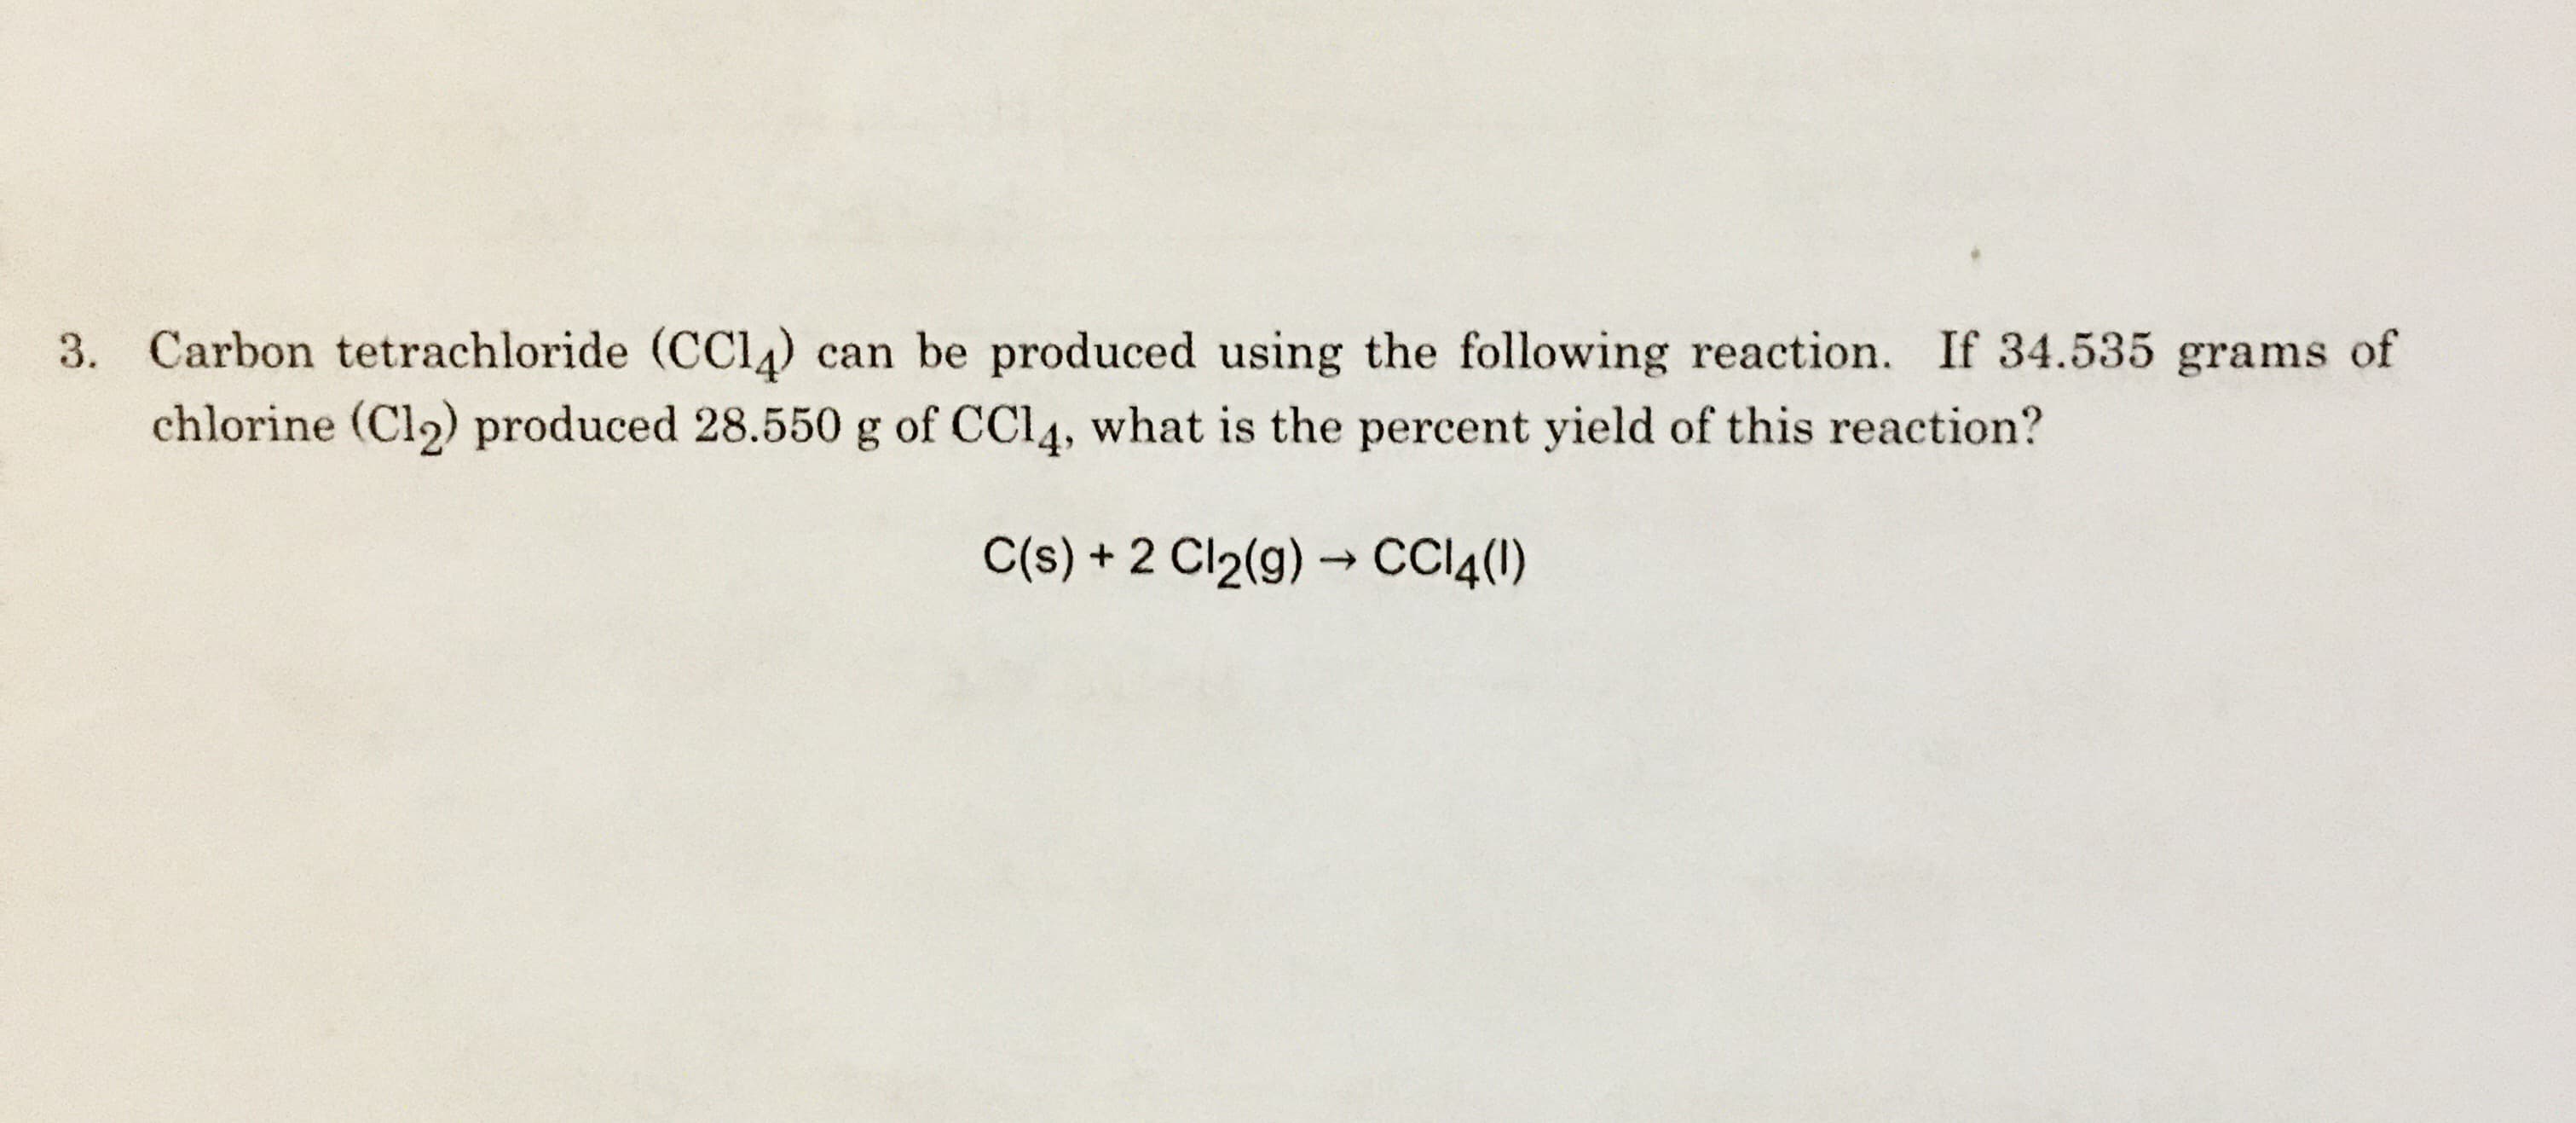 3. Carbon tetrachloride (CCl4 can be produced using the following reaction. If 34.535 grams of
chlorine (Cl2) produced 28.5500 g of CCI4, what is the percent yield of this reaction?
C(s)+2 Cl2(g)CC4()
